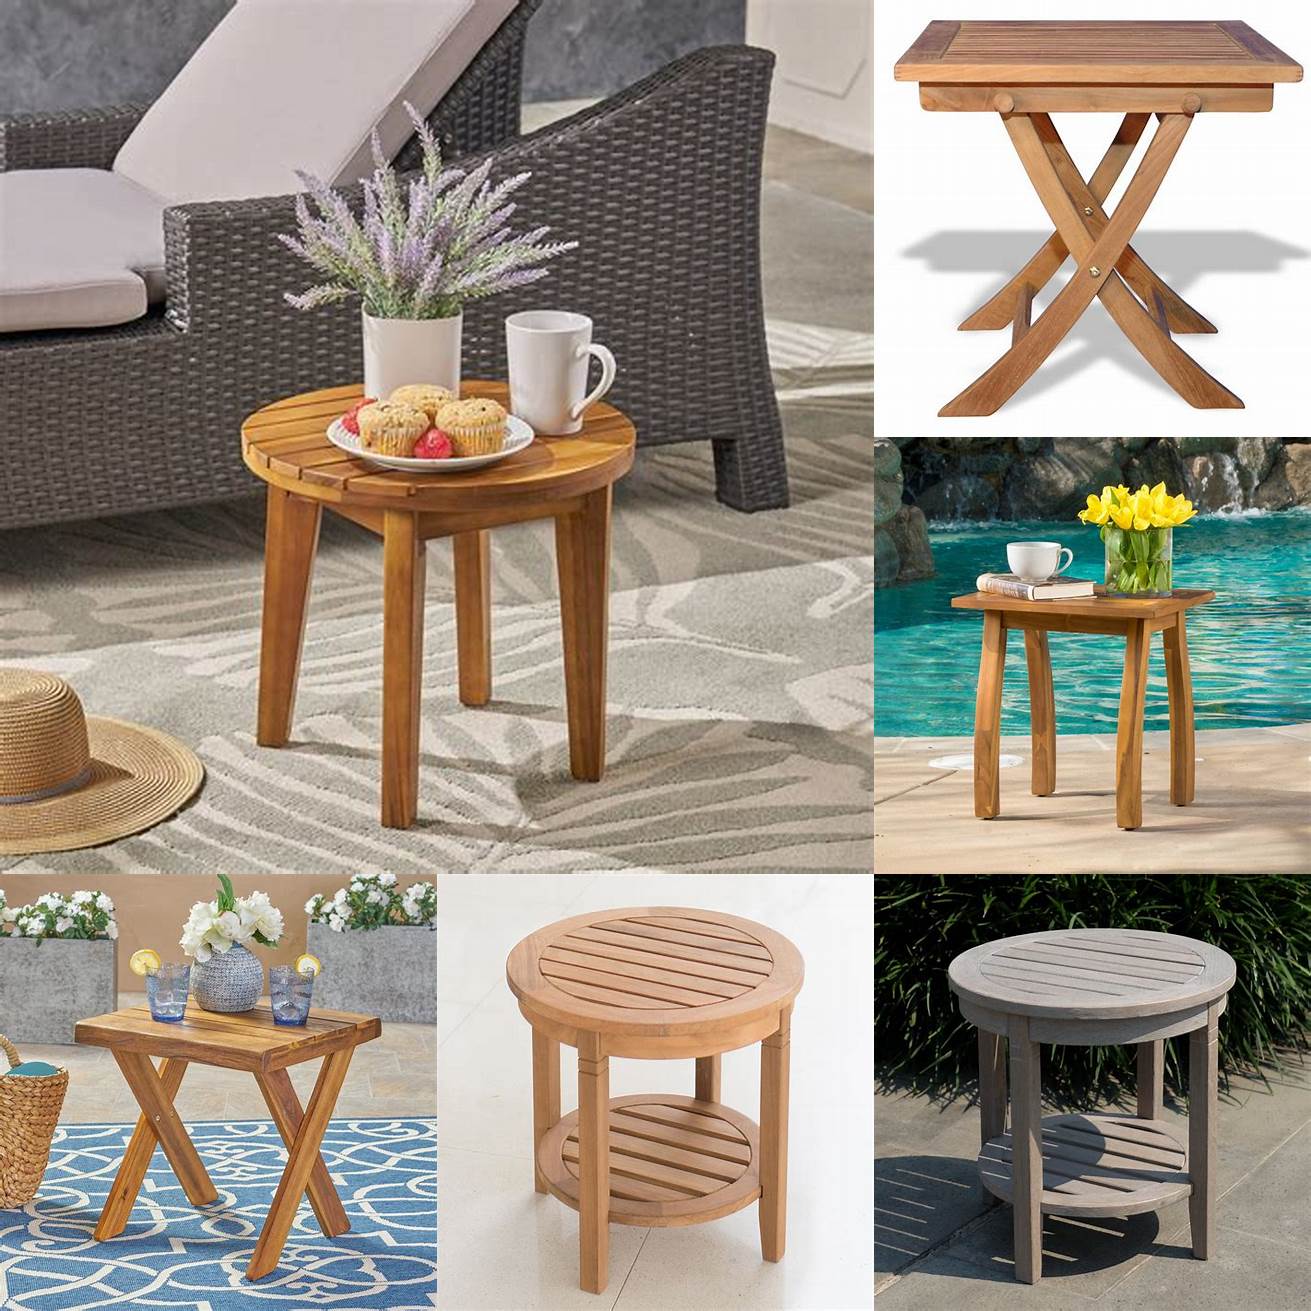 Teak Wood Patio Table with Side Tables